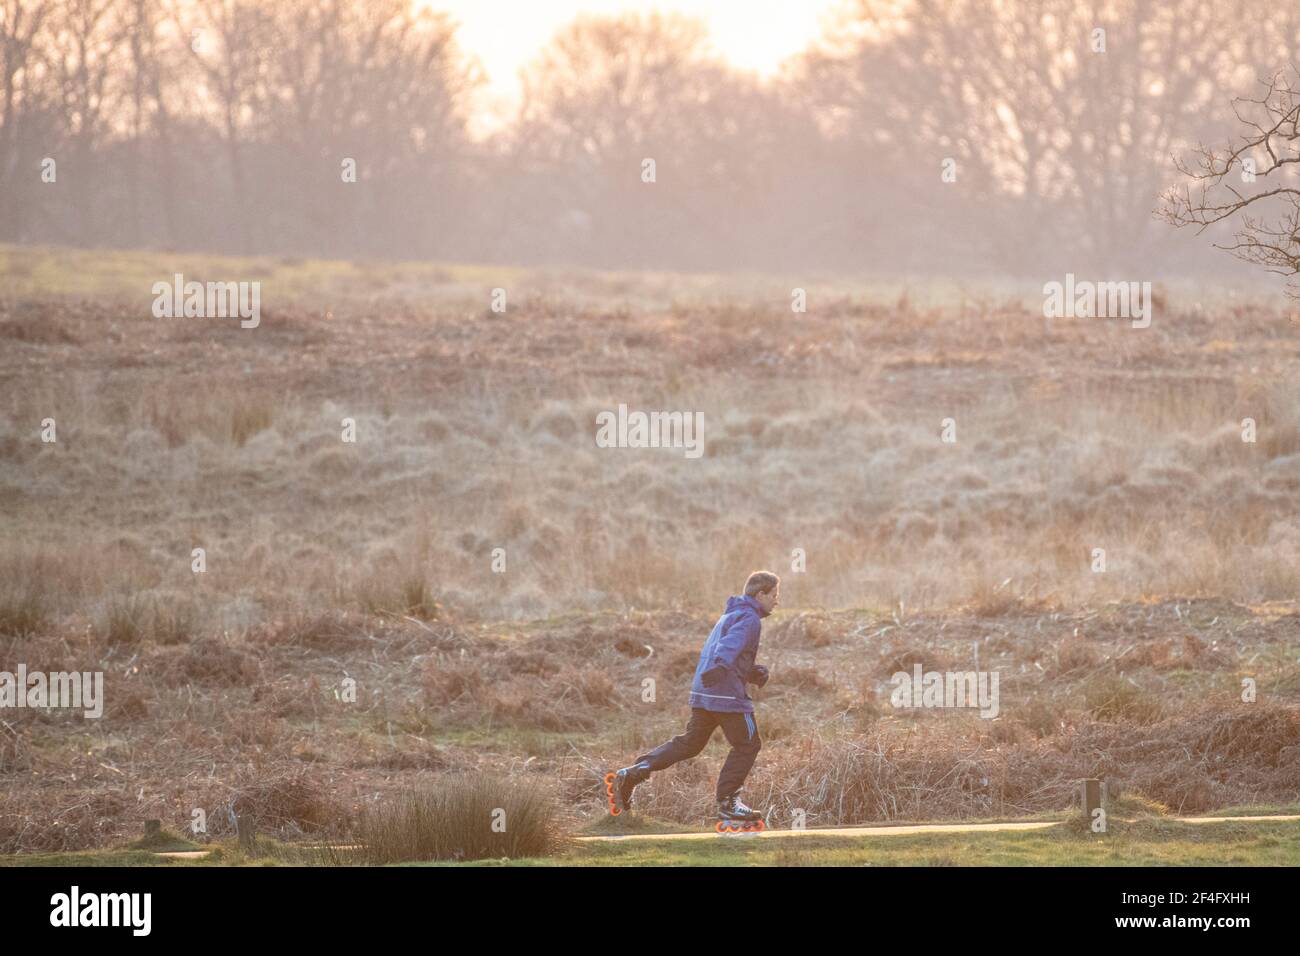 A roller blader in Richmond Park at dusk Stock Photo